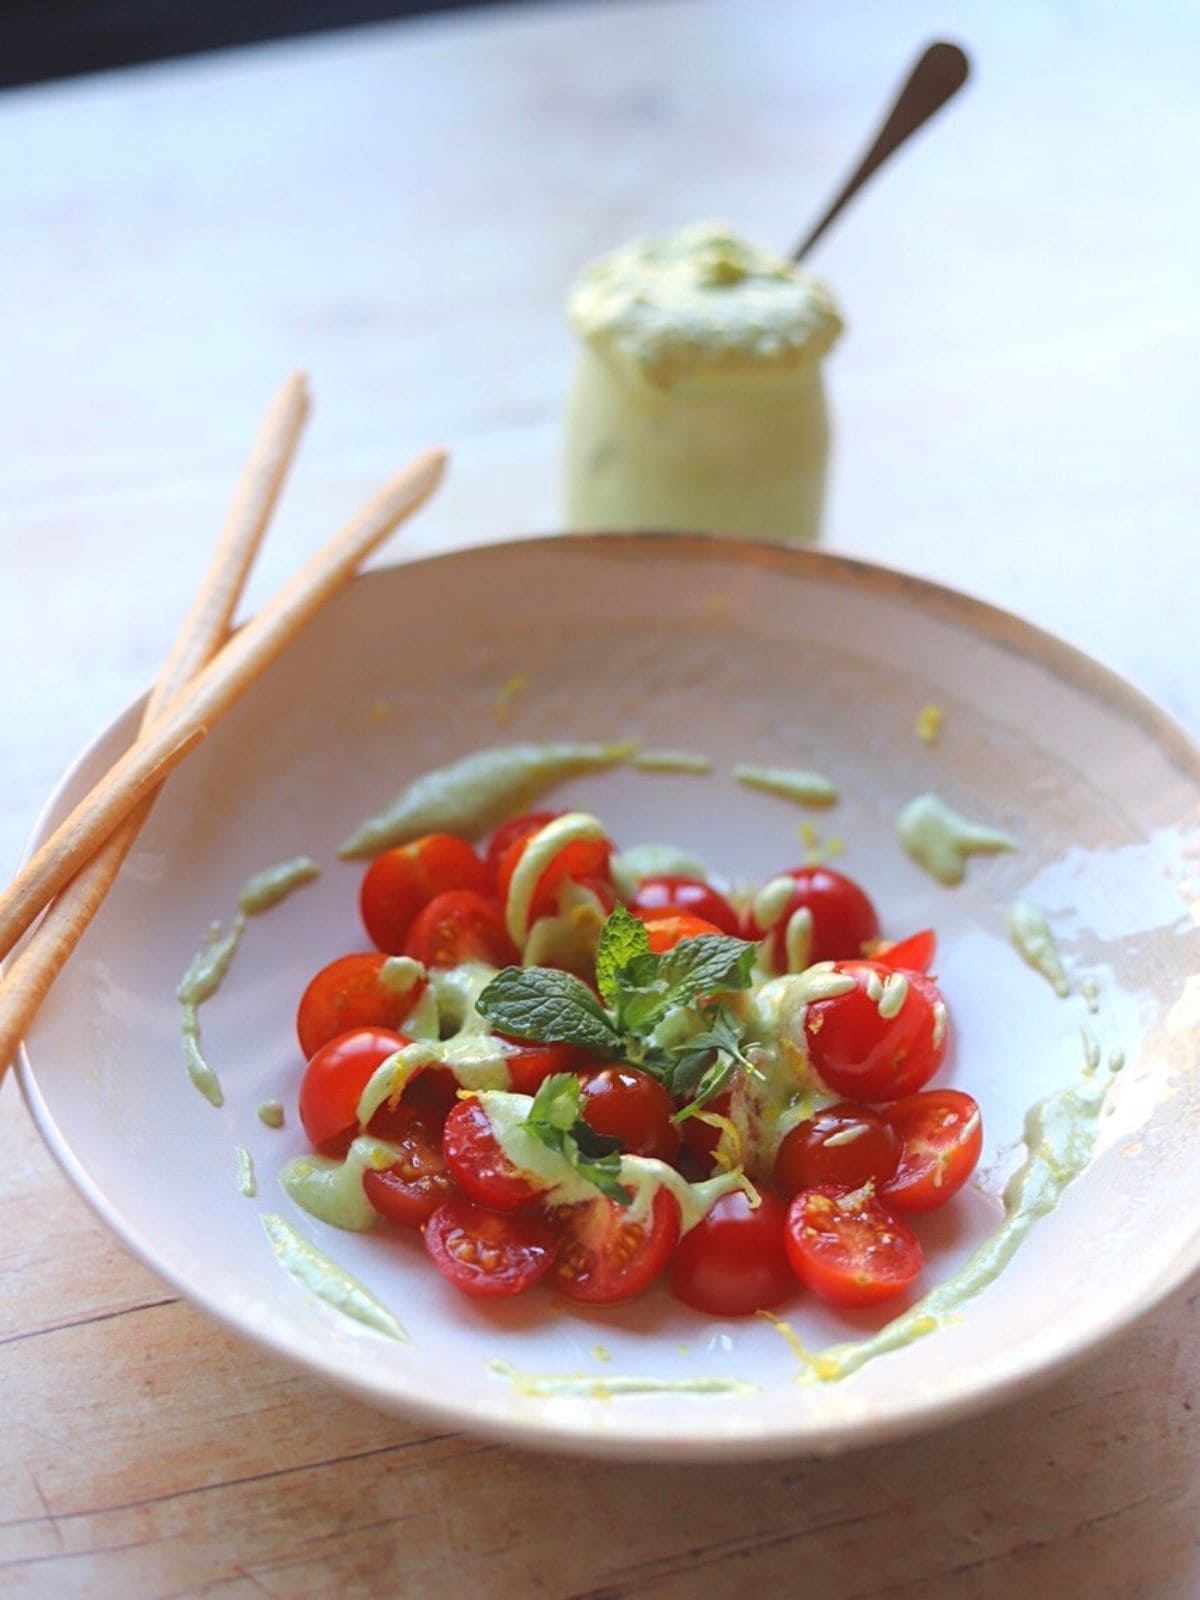 Bowl with feta dressing on cherry tomatoes.